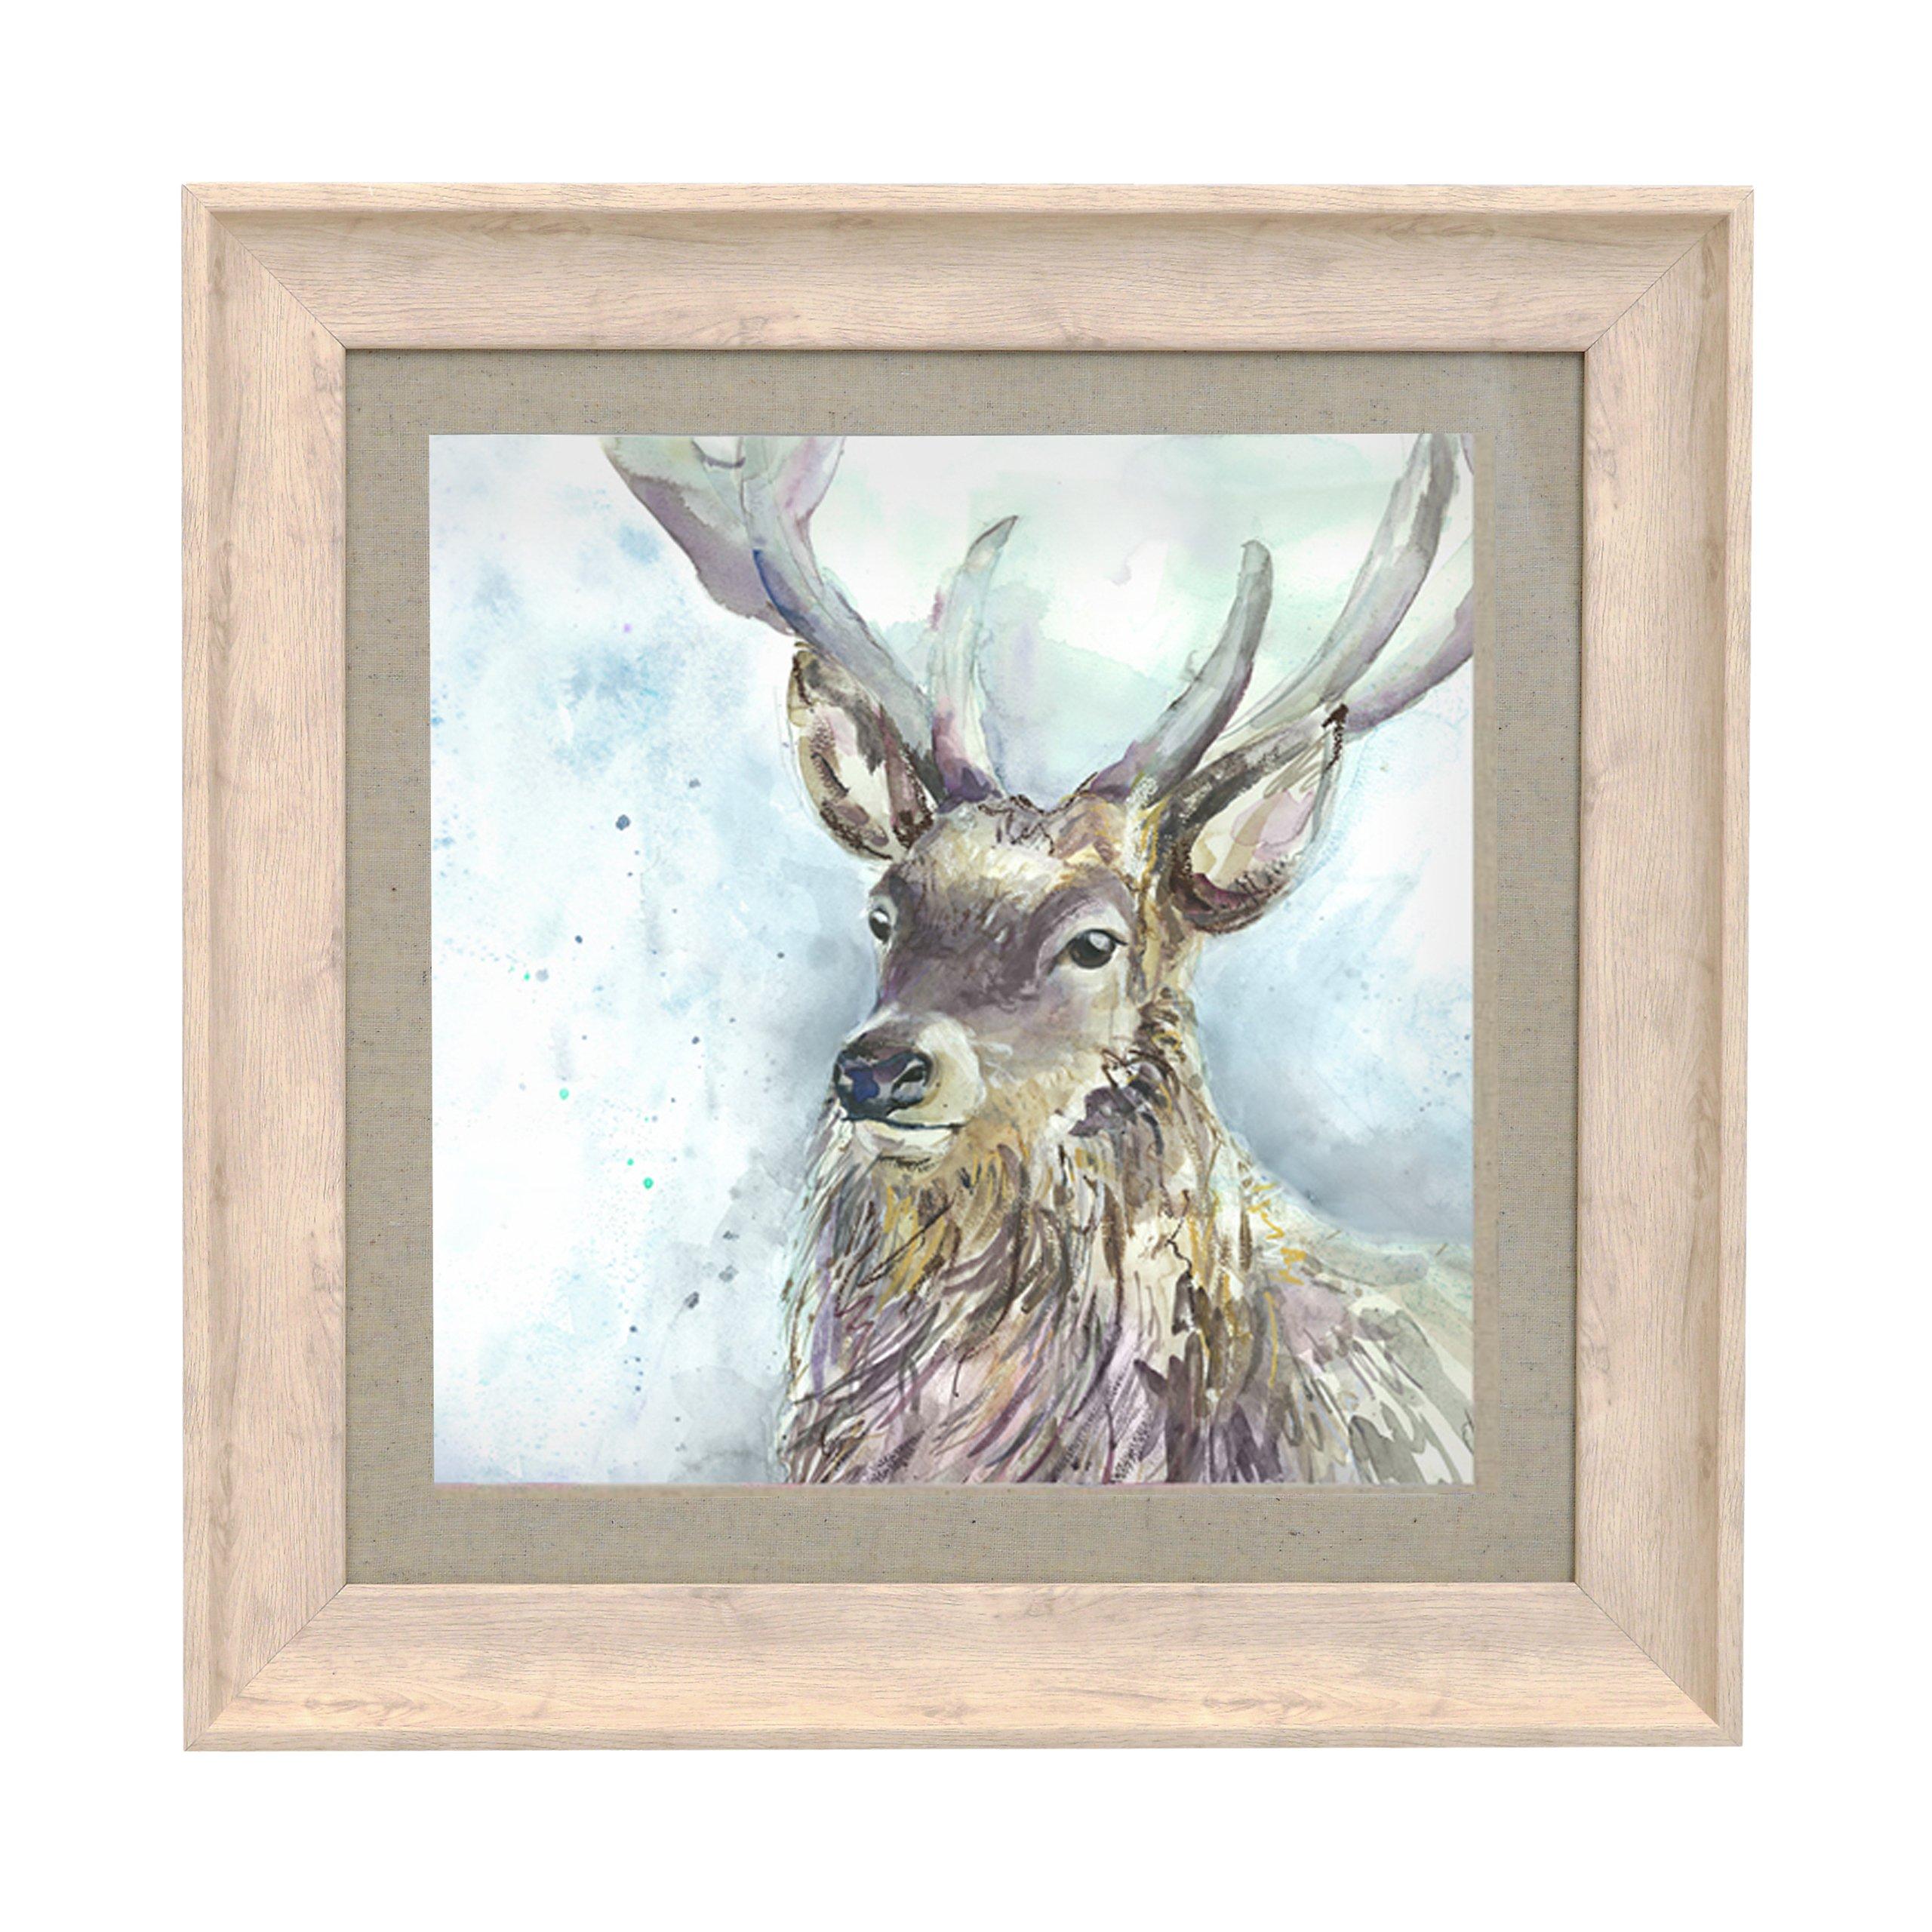 Wallace Framed Print